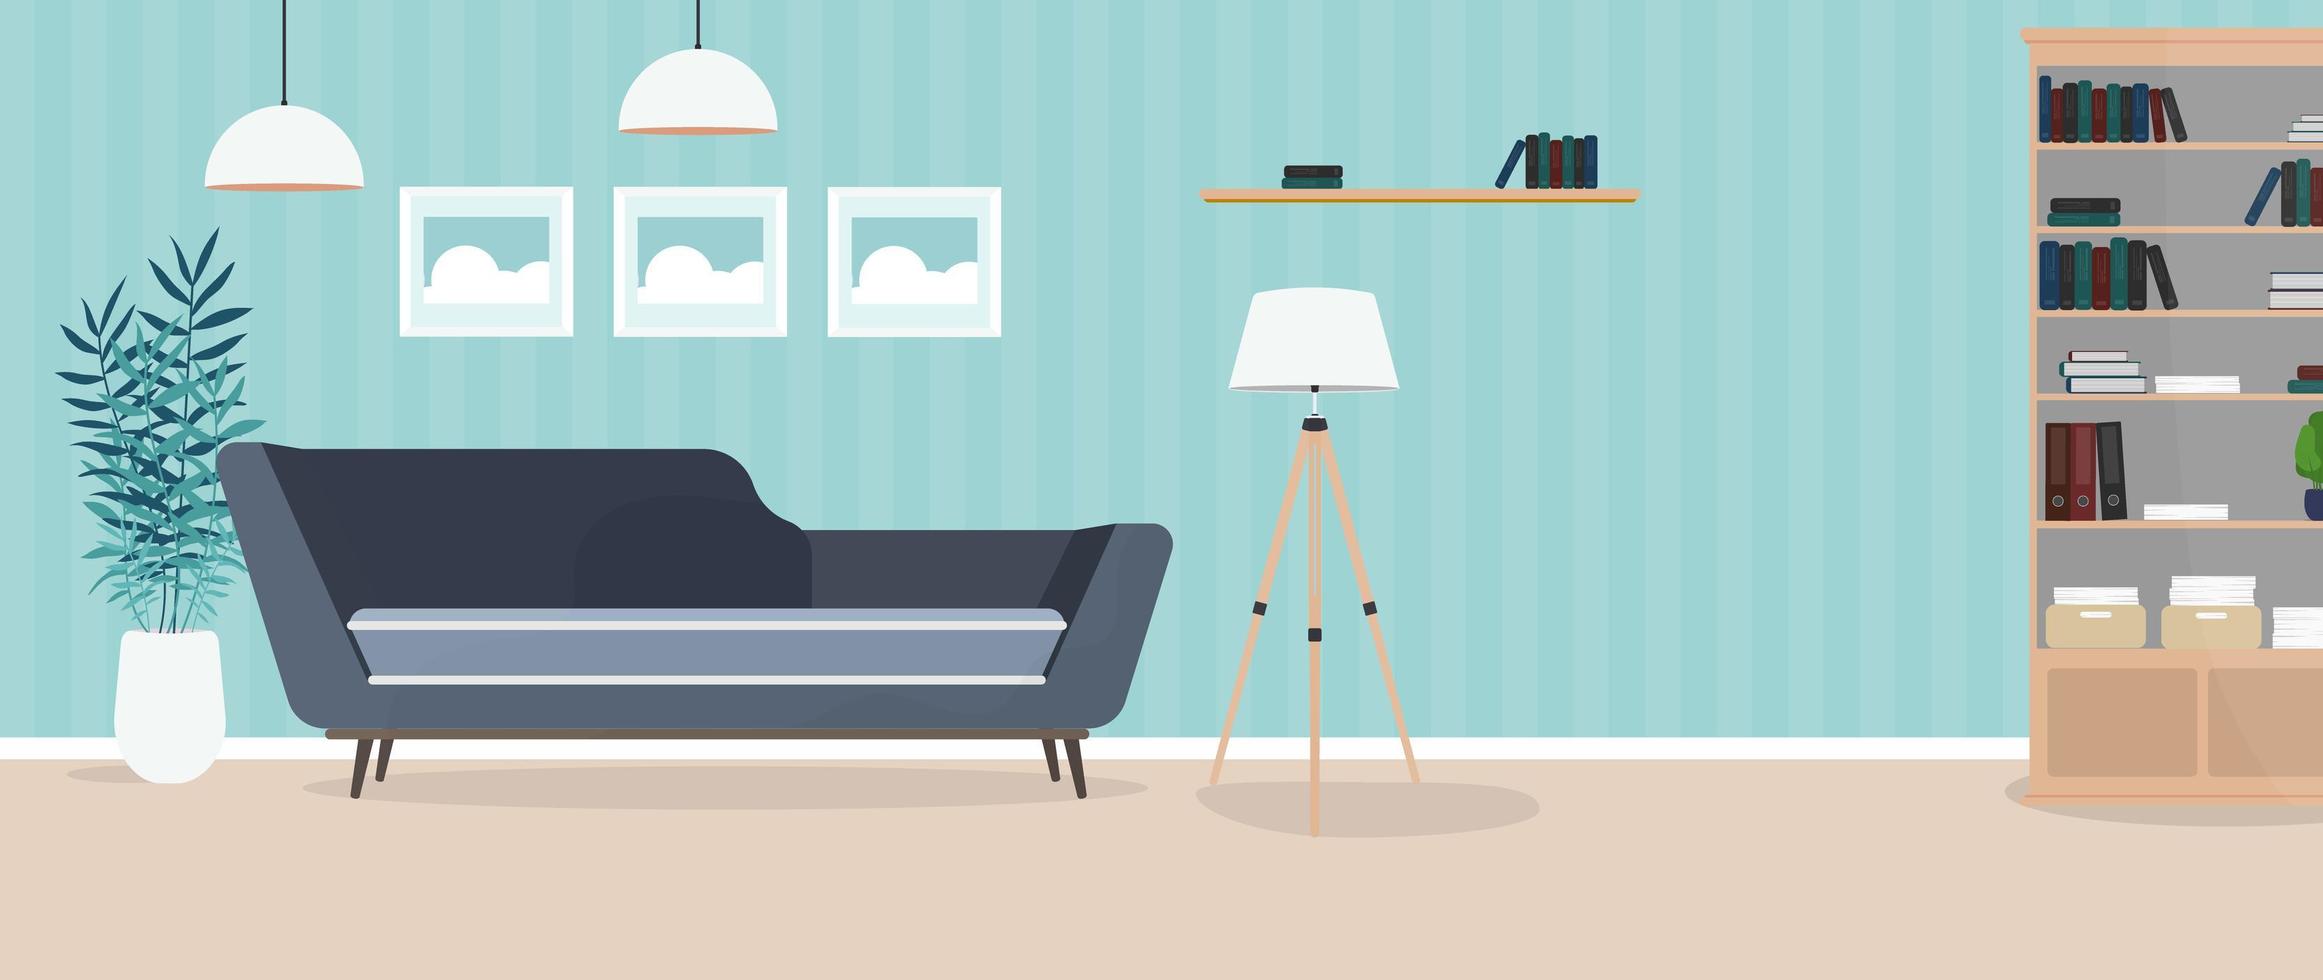 Modern bright room. Living room with a sofa, wardrobe, lamp, paintings. Furniture. Interior. Vector. vector